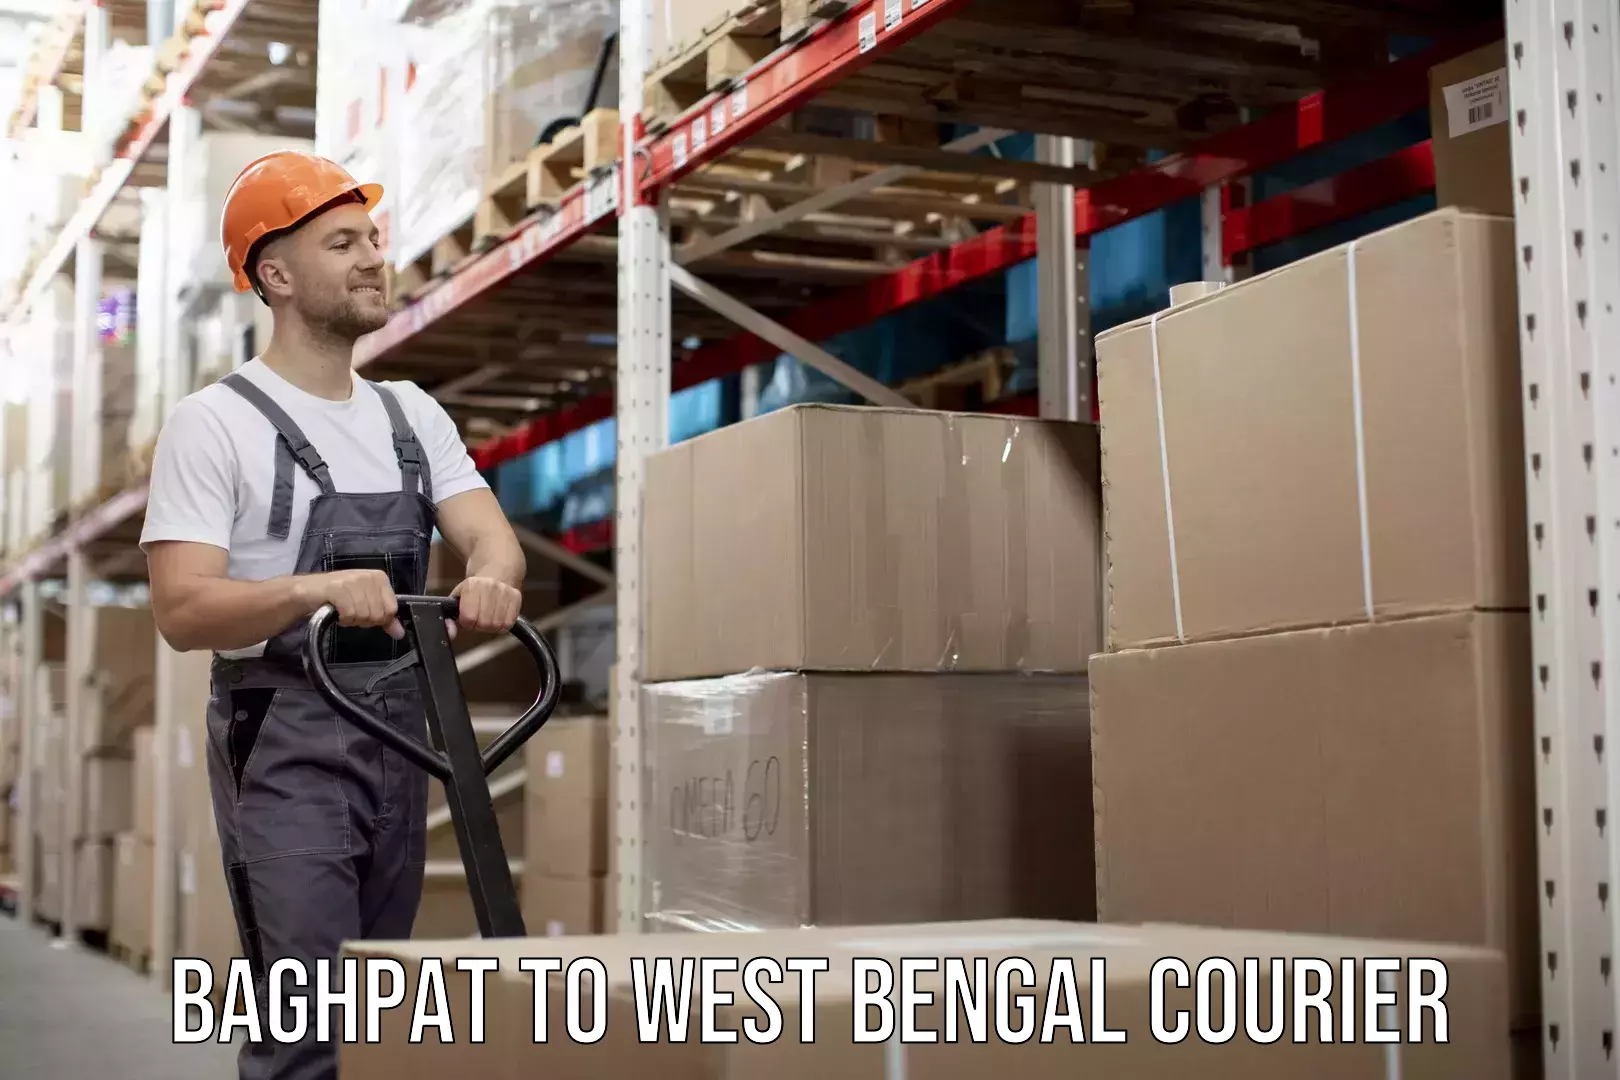 Bulk courier orders Baghpat to West Bengal